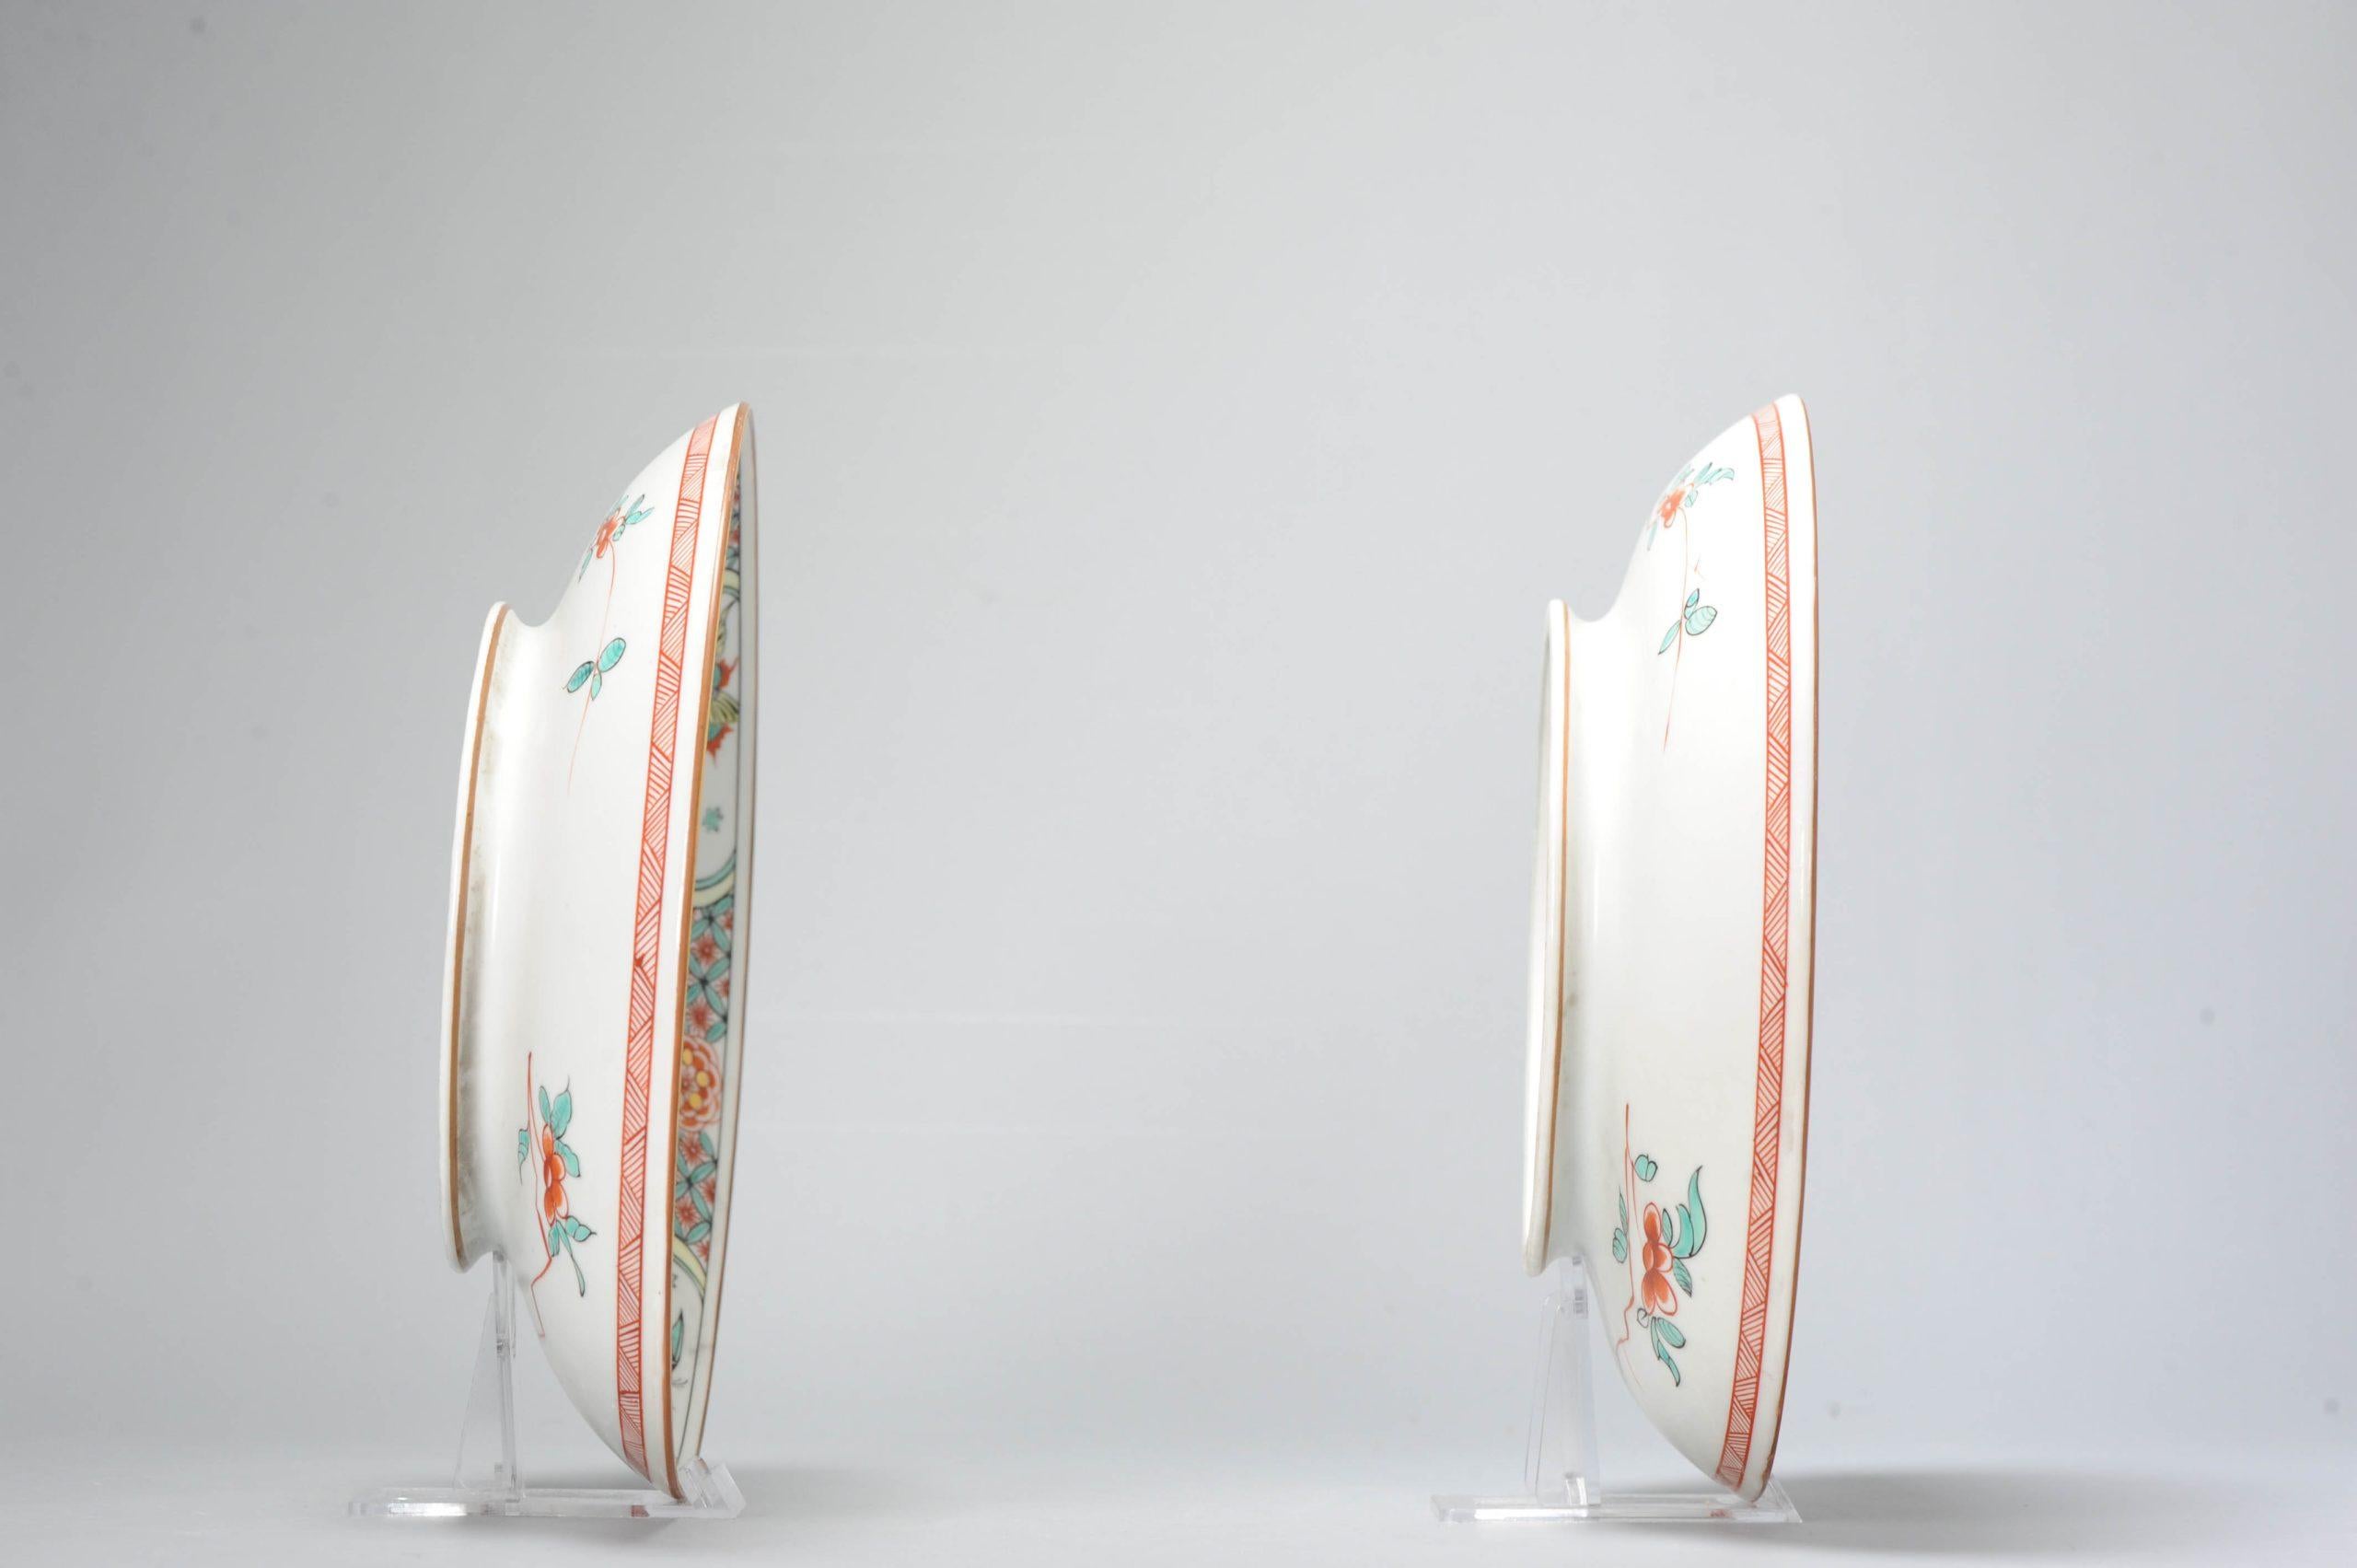 Very nice and richly decorated pair plate/dish from a french factory. Made after example of Kangxi/Yongzheng period⁠ Chinese porcelain pieces

Additional information:
Material: Porcelain & Pottery
Category: Polychrome, SE Asia